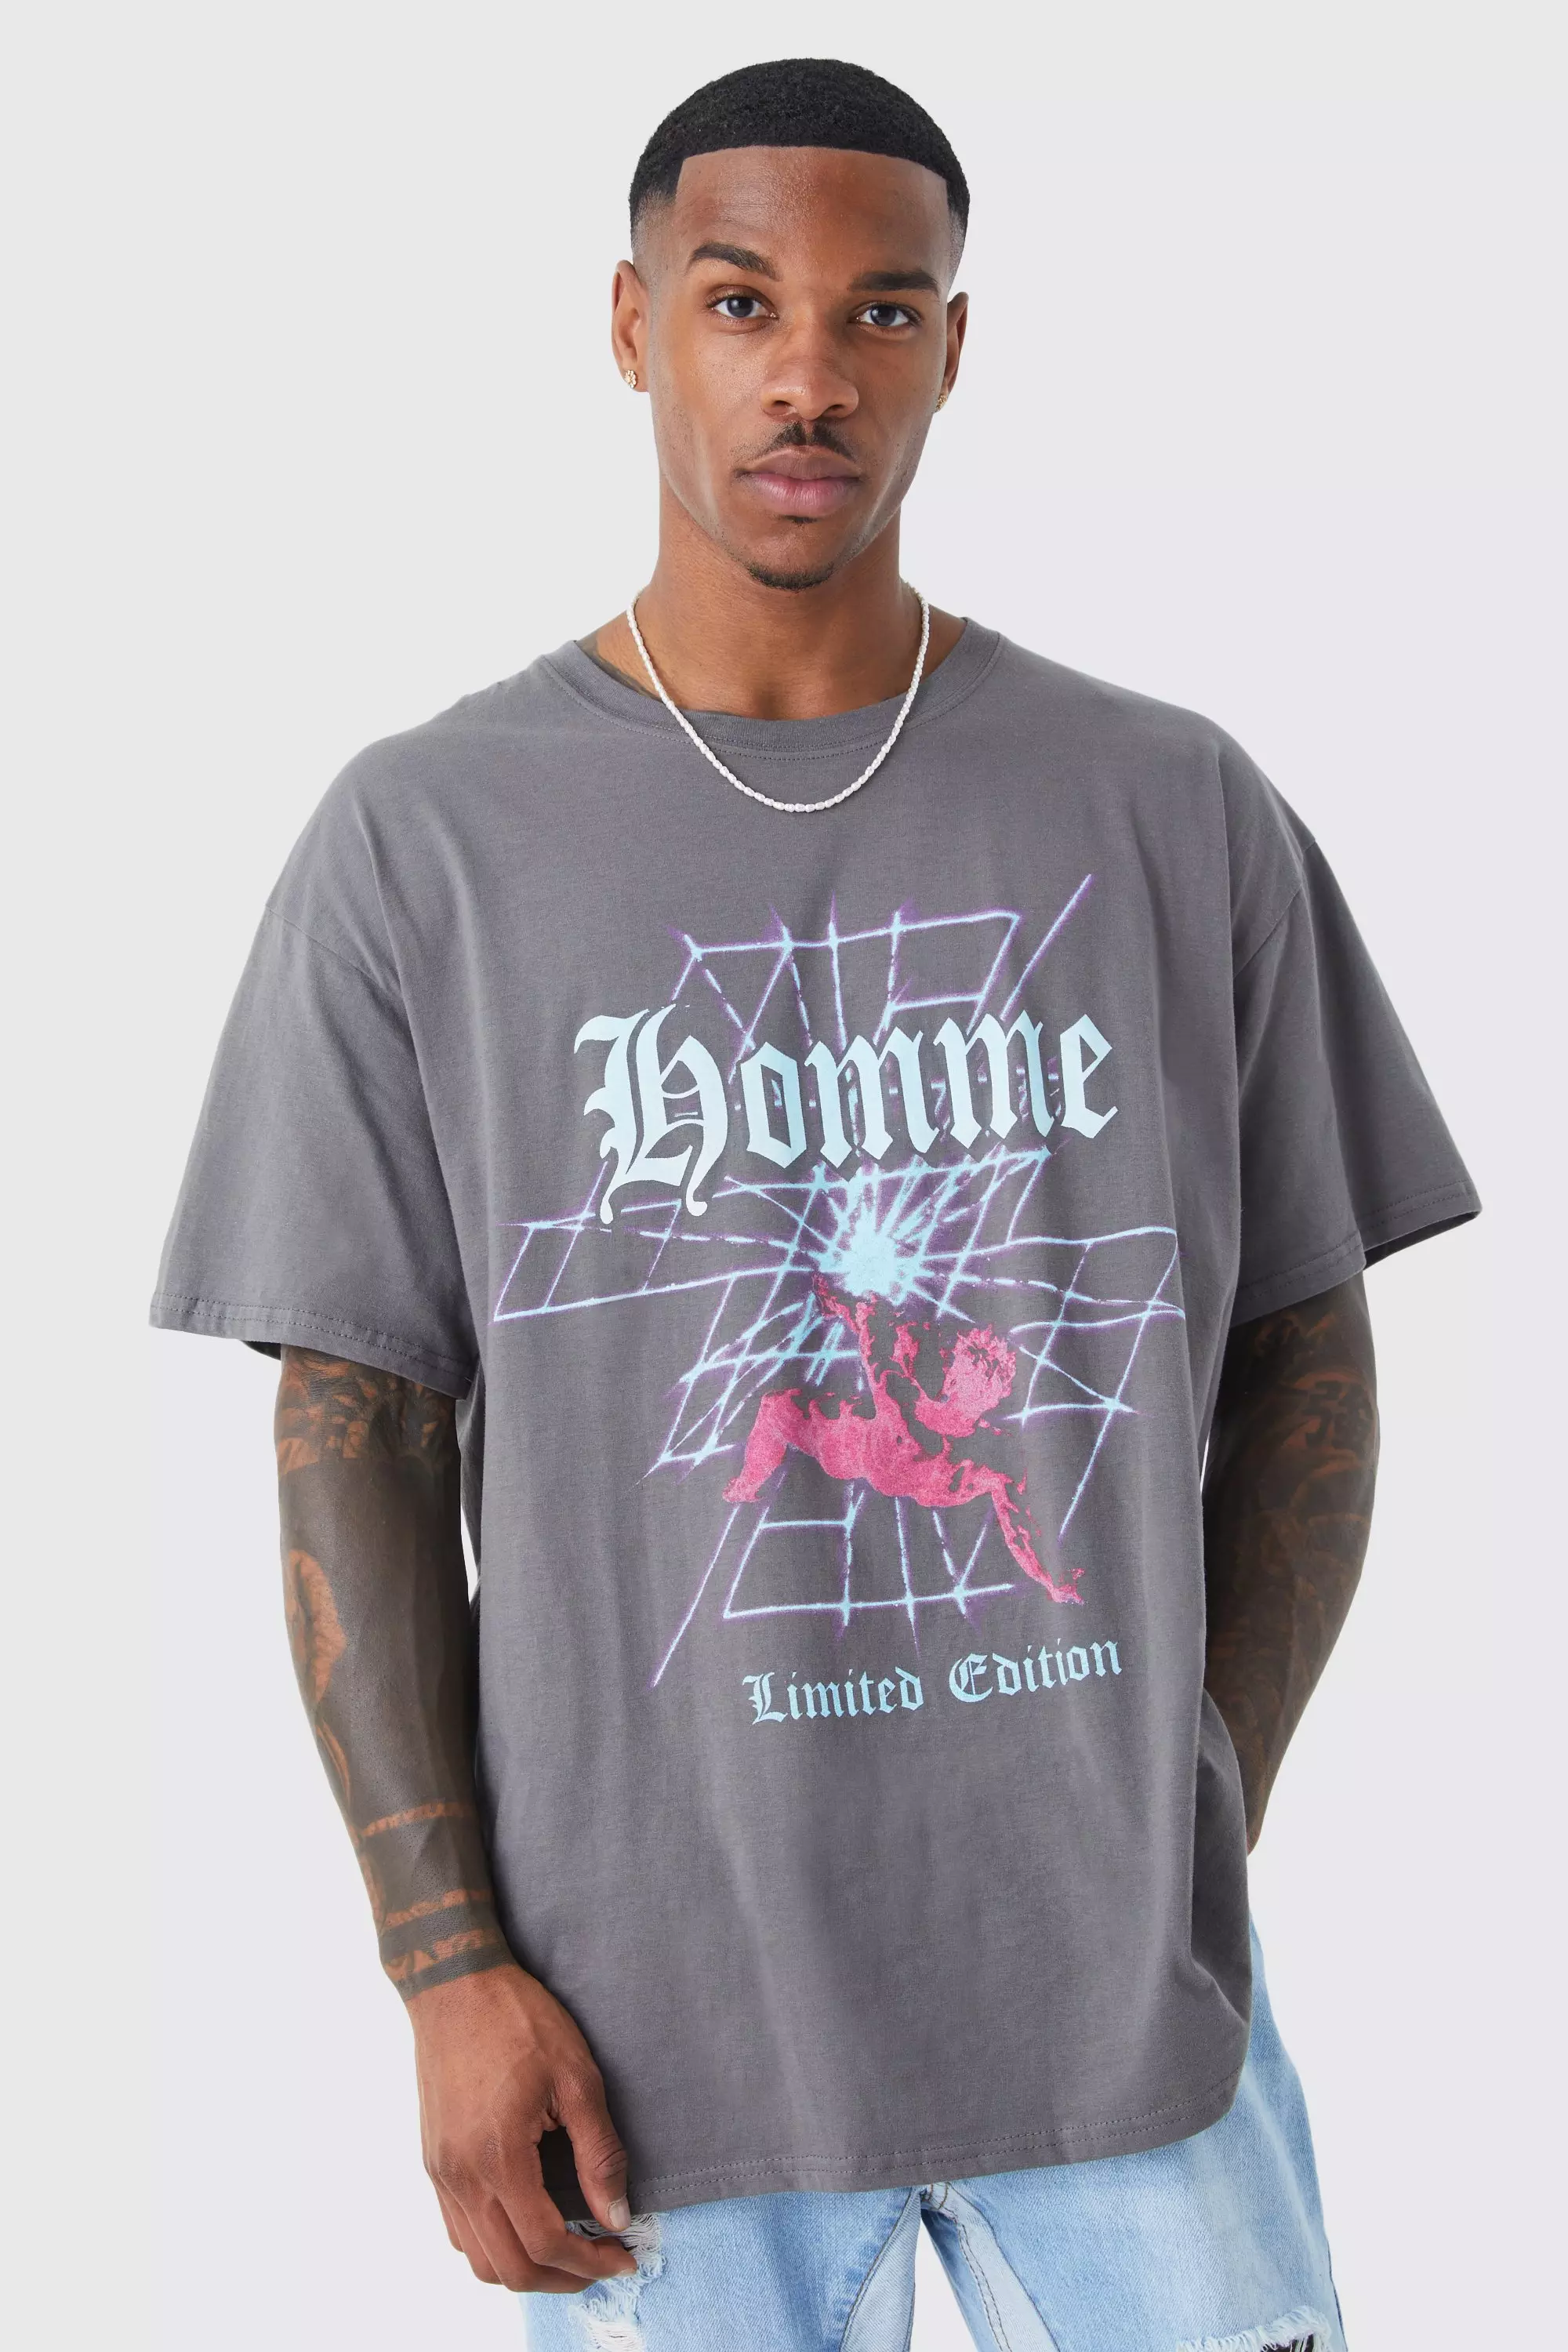 Oversized Homme Graphic T-shirt Charcoal